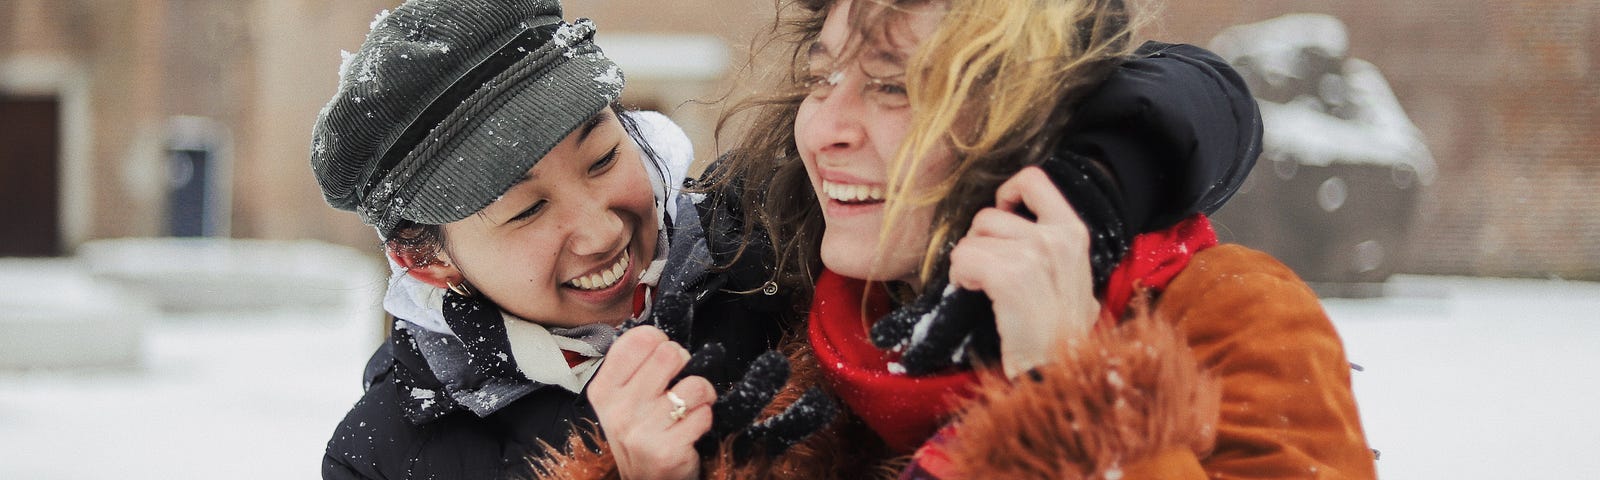 A young woman in a dark jacket and cap stands close to another woman in an orange jacket. They are laughing as if they are playing together in the snow.